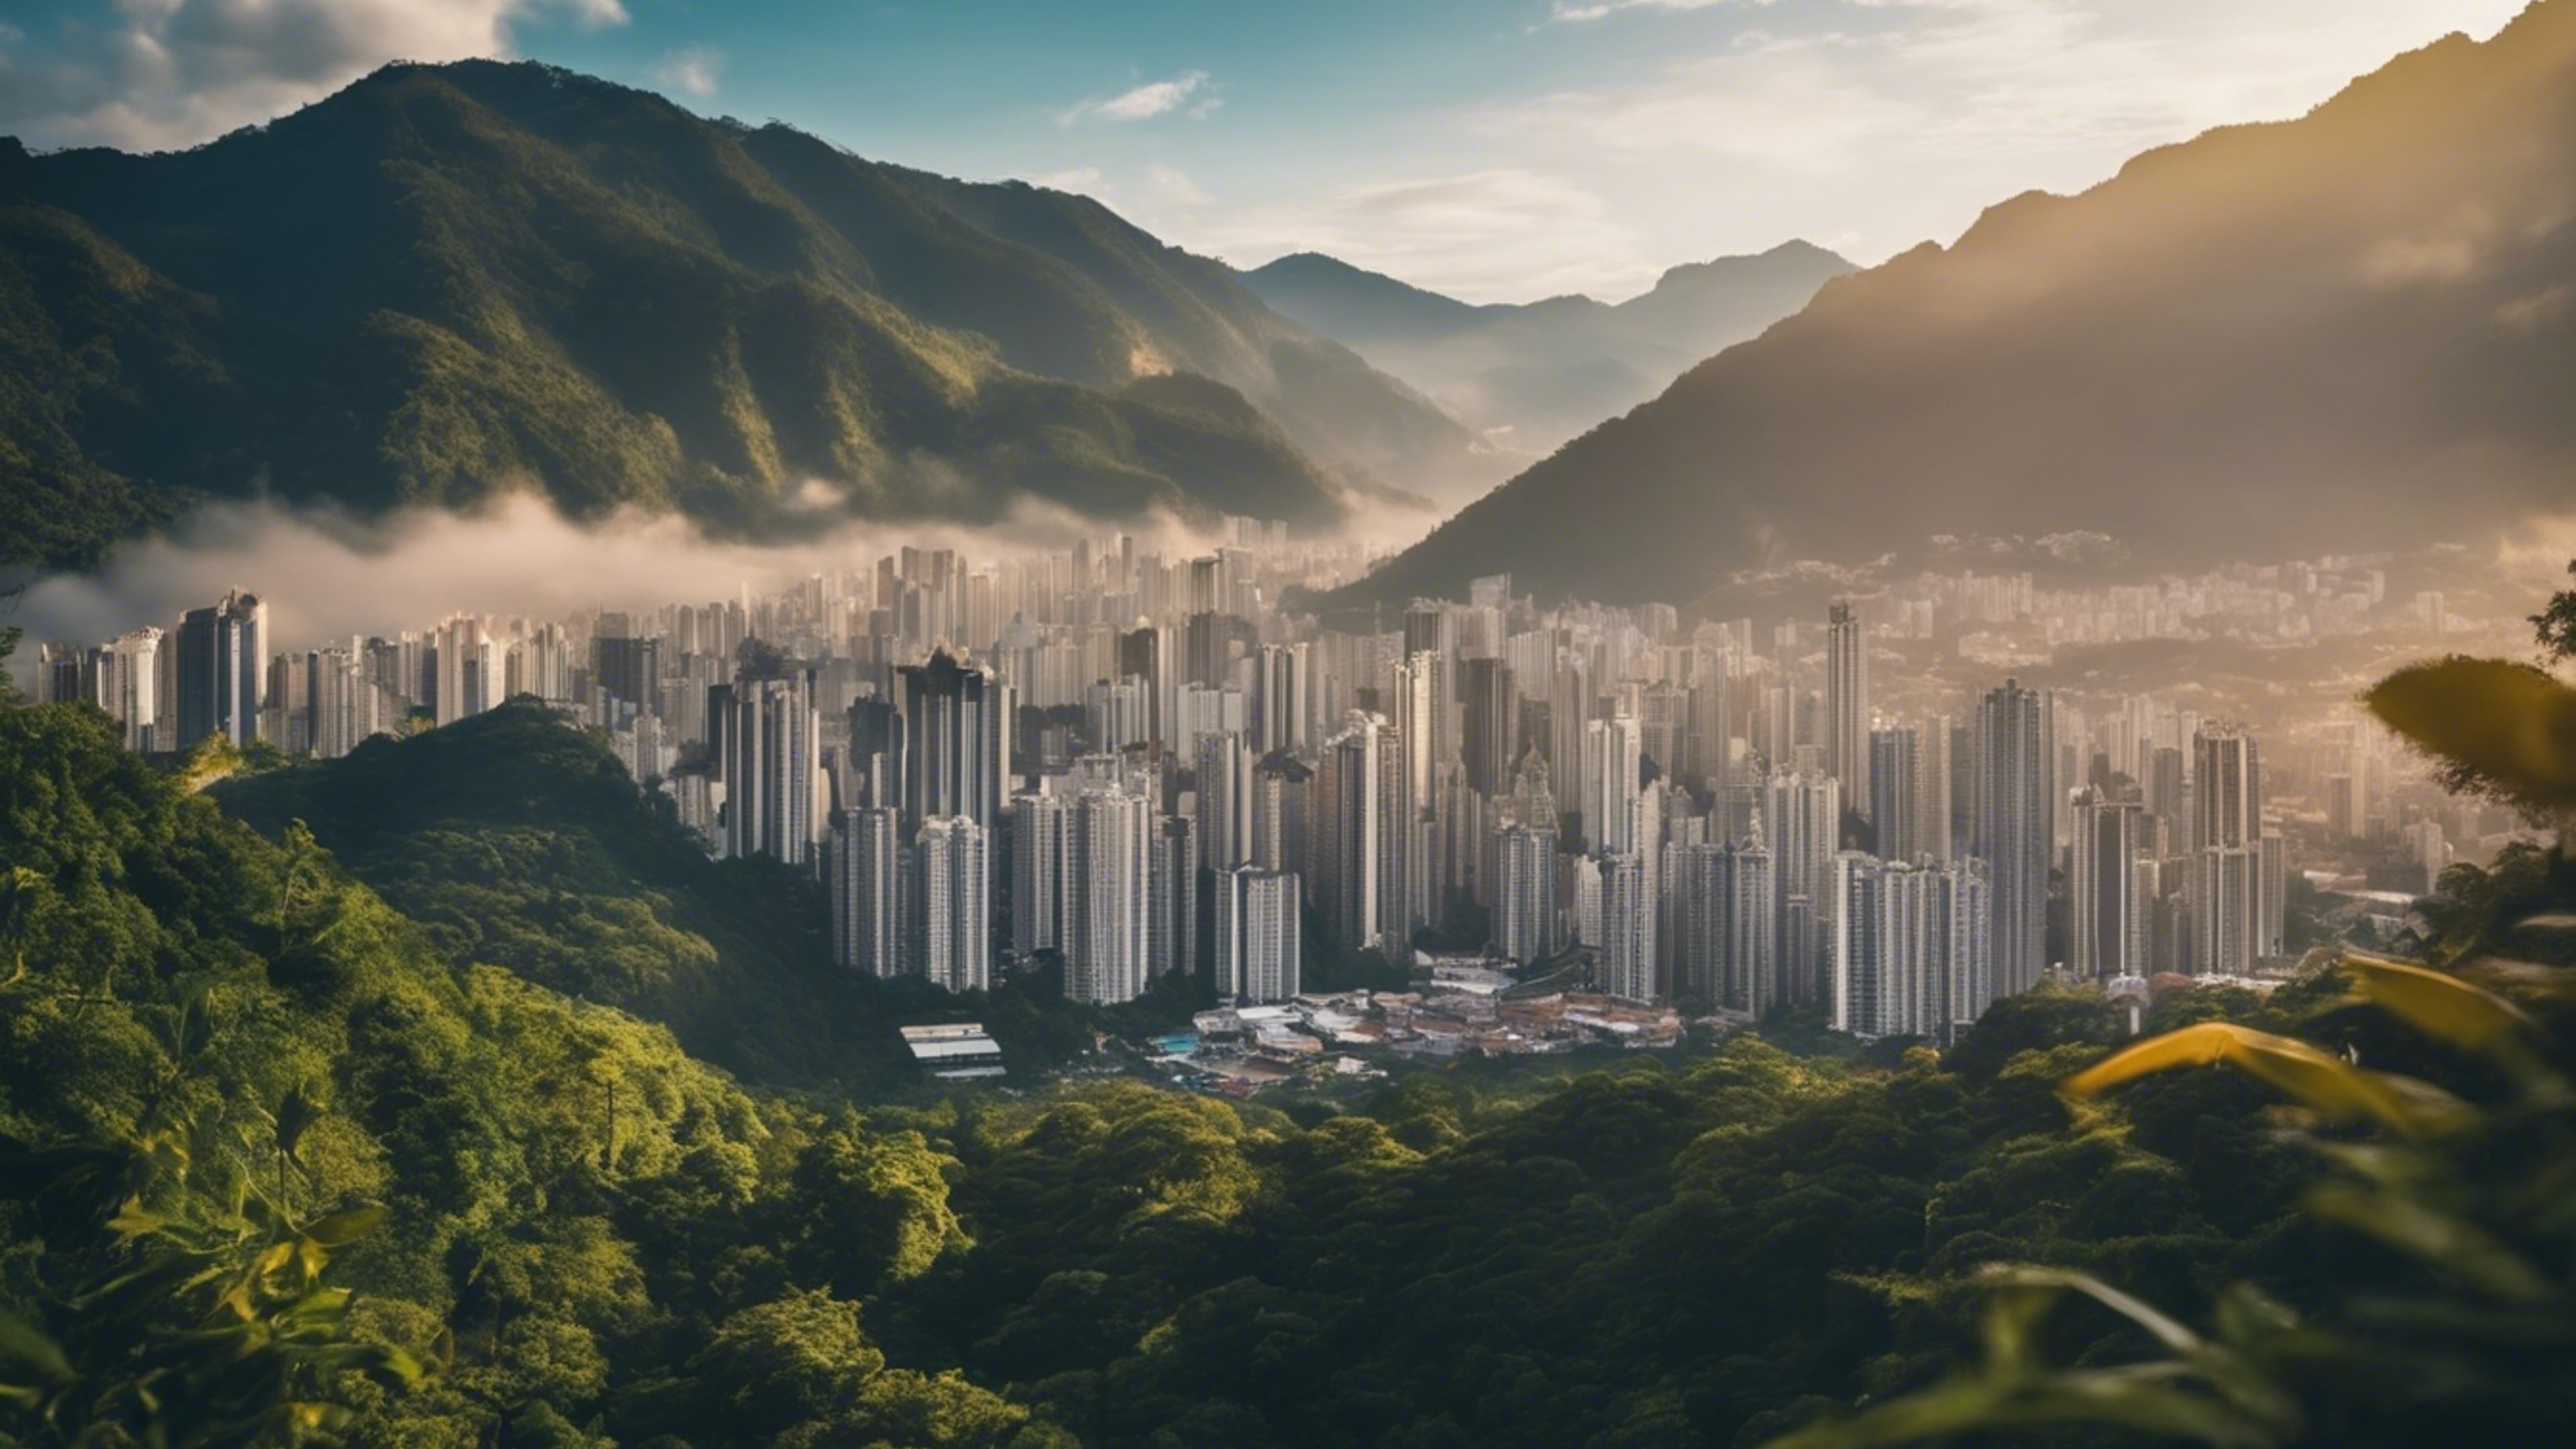 The enchanting skyline of a mountain range rainforest city in the heart of nature. Wallpaper[97852b95a374431baf05]